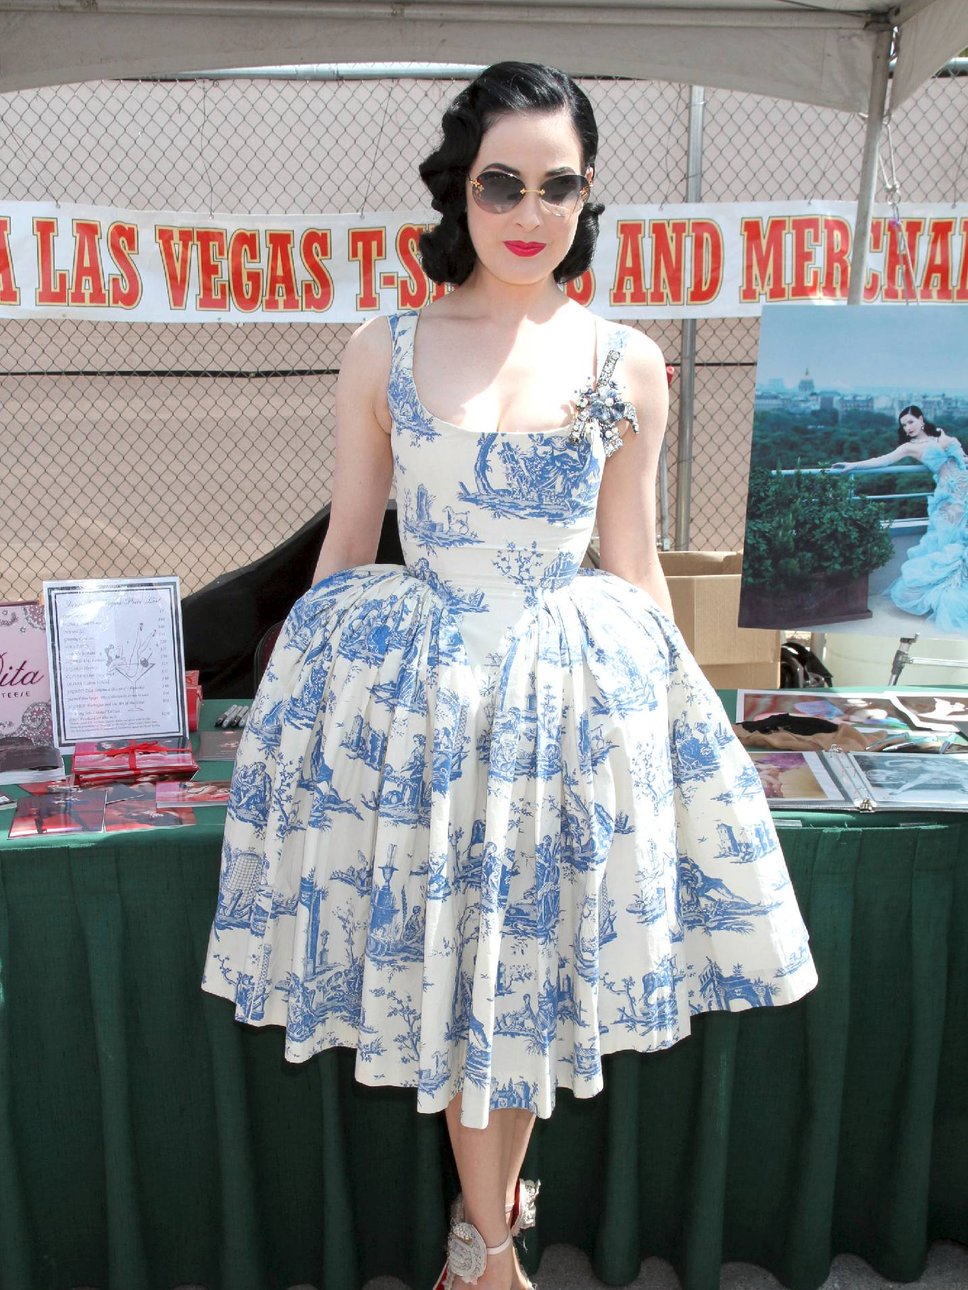 Dress Up Like Dita Von Teese - Outfit Ideas HQ